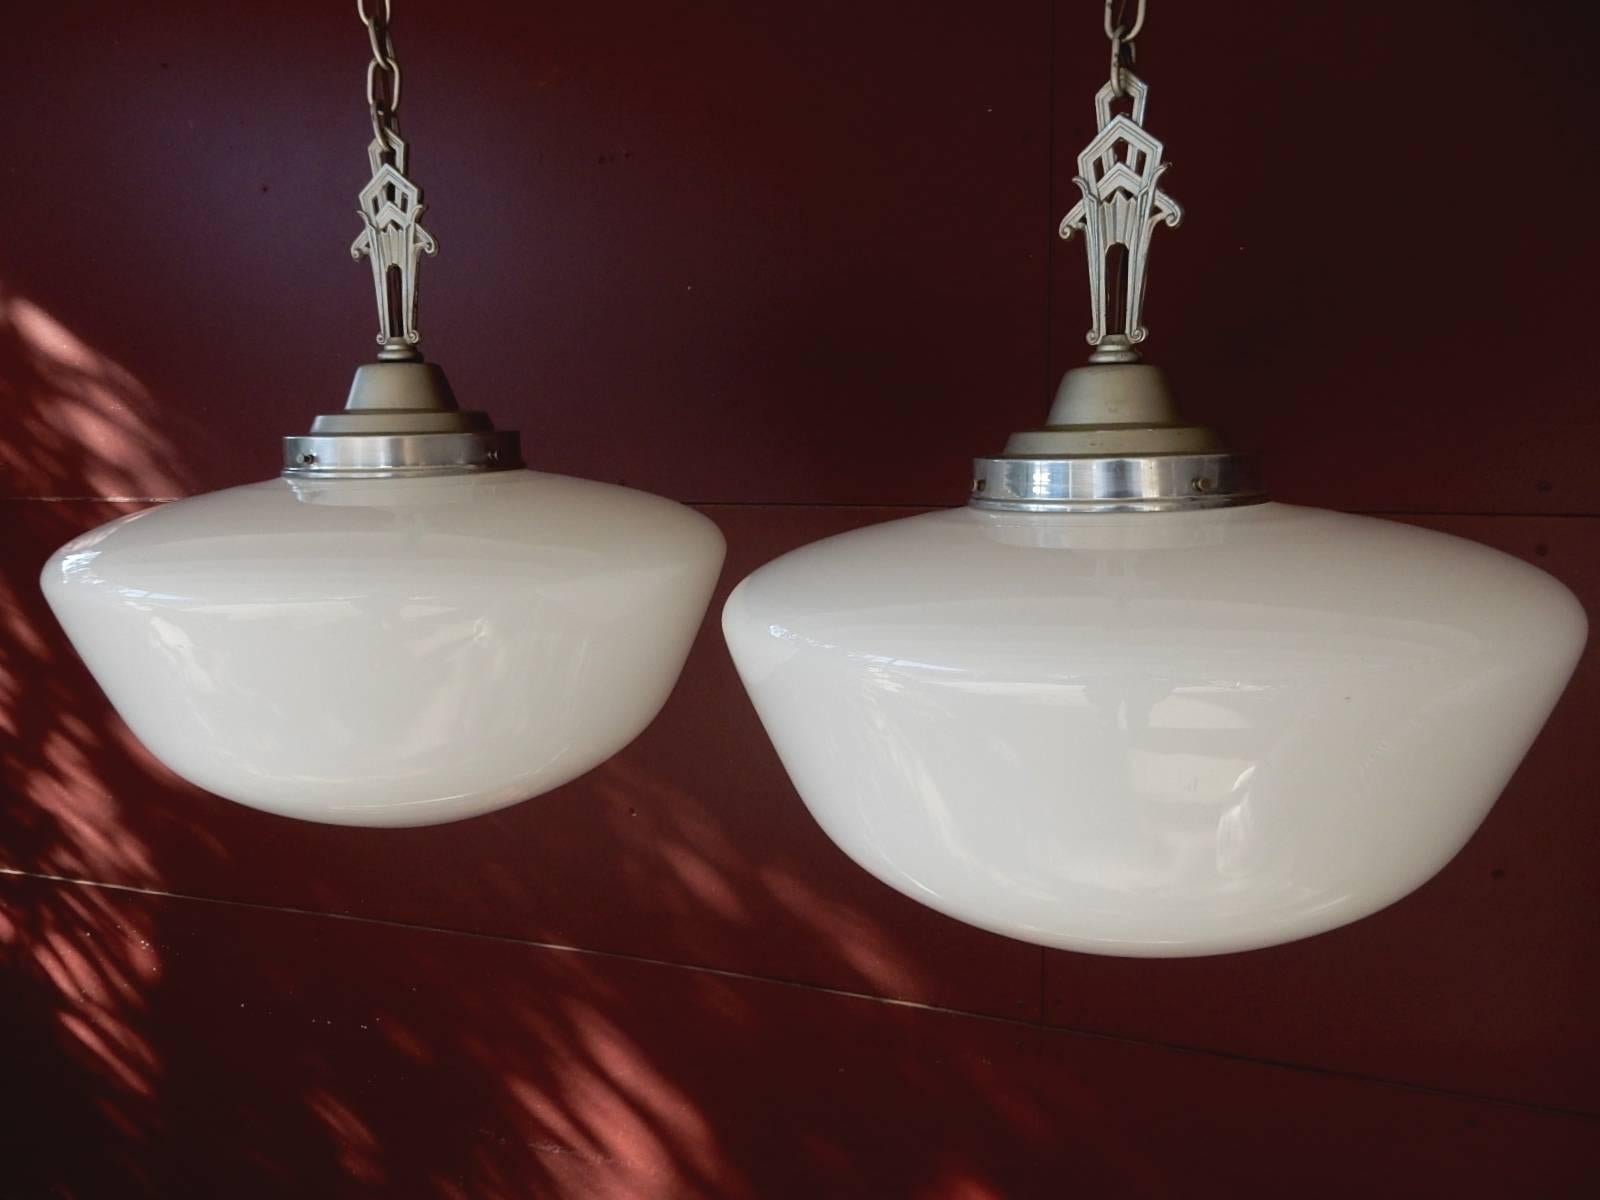 Huge half round hand spun thin milk glass pendant lamps.
Art Deco design finial fitter cap. Amazing glow from antique milk glass.
Polished aluminium ceiling cap and fitter. Measures: 54" drop from ceiling. Each takes a single standard